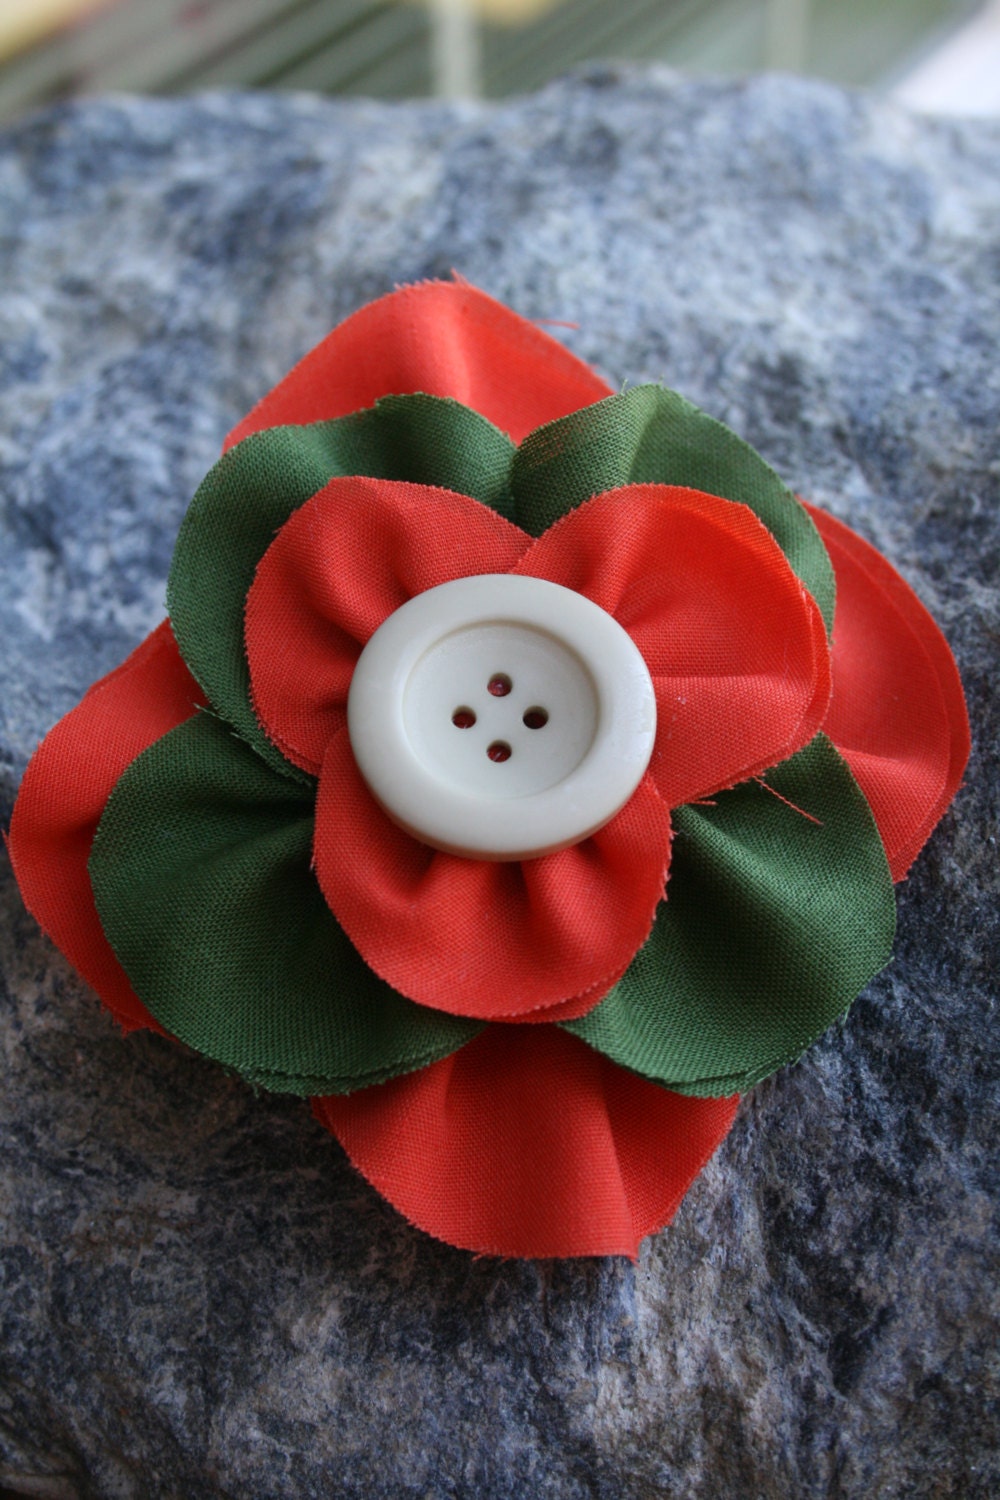 Handmade orange and green stacked flower with button in the middle. - RockabillyBabyPlace